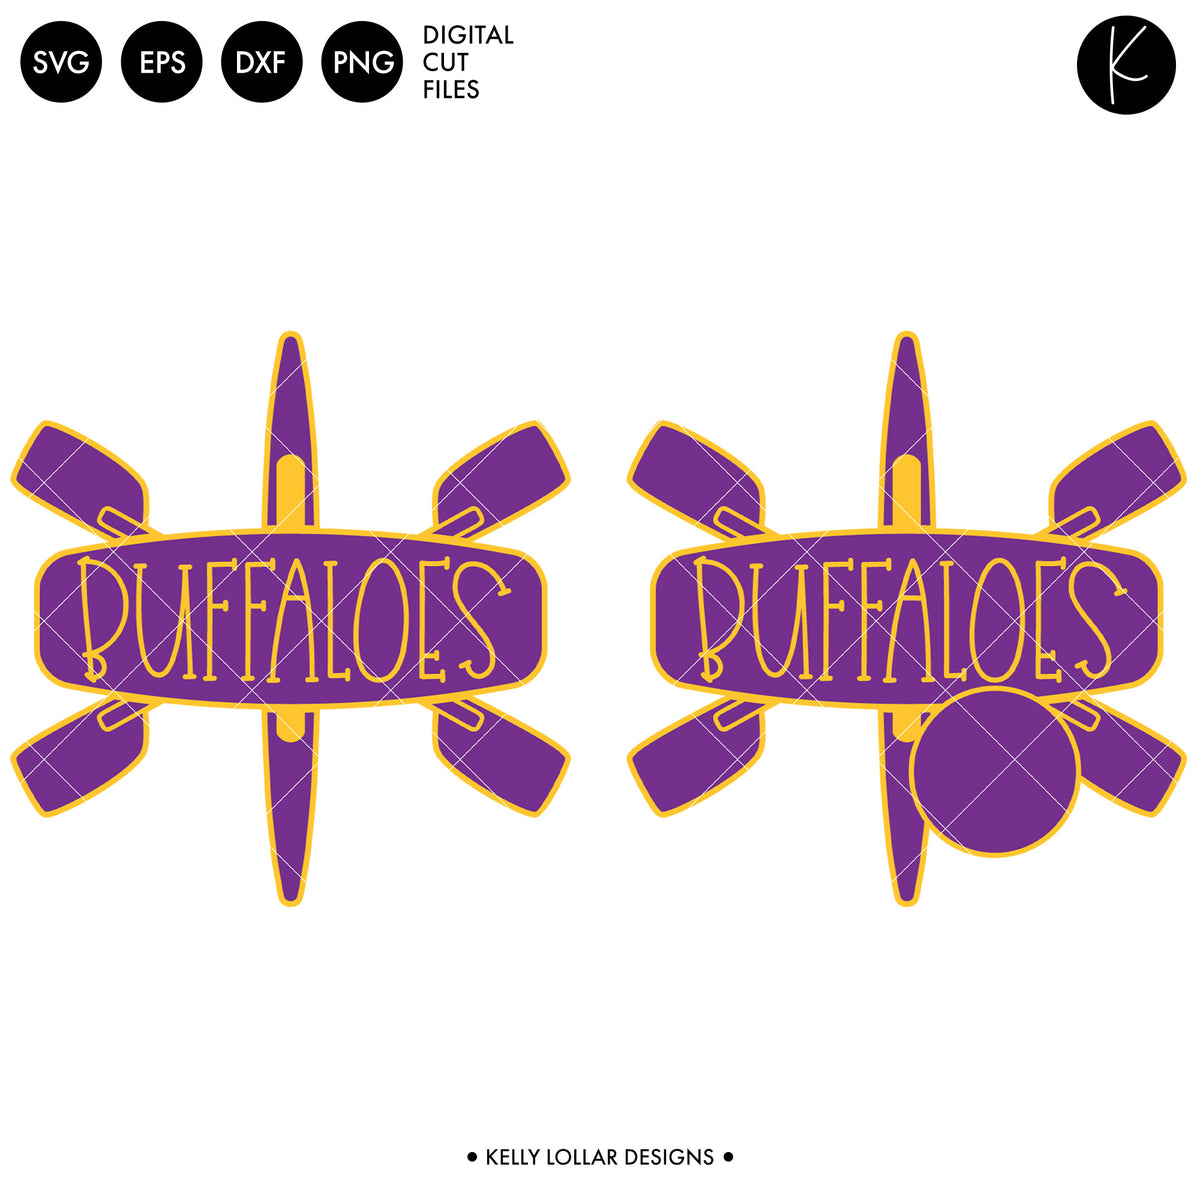 Buffaloes Rowing Crew Bundle | SVG DXF EPS PNG Cut Files